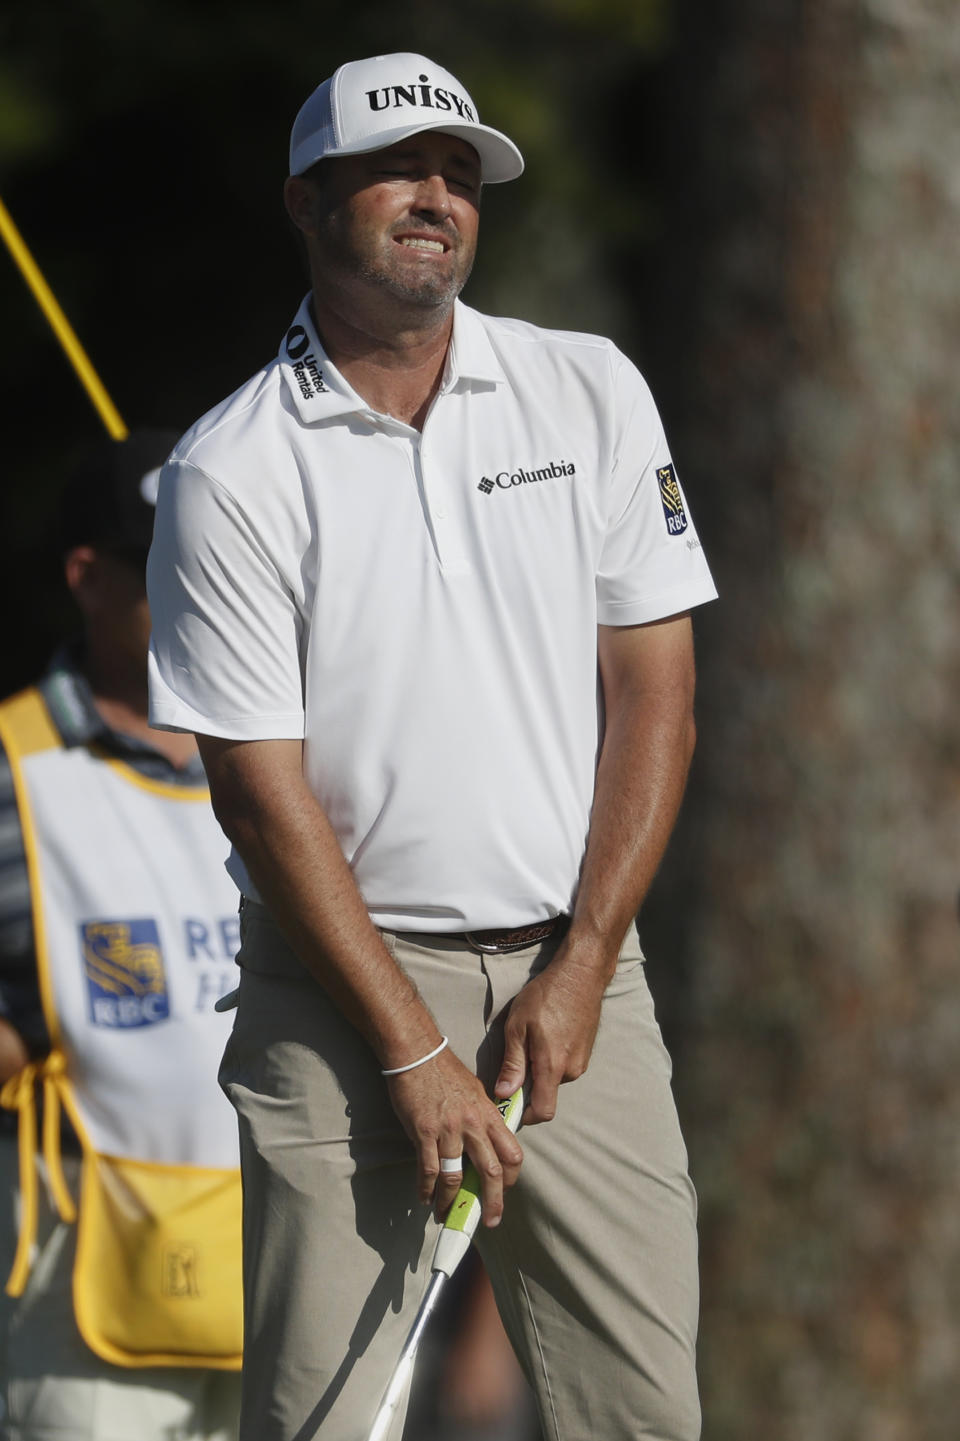 Ryan Palmer grimaces after missing a putt on the 15th green, during the first round of the RBC Heritage golf tournament, Thursday, June 18, 2020, in Hilton Head Island, S.C. (AP Photo/Gerry Broome)